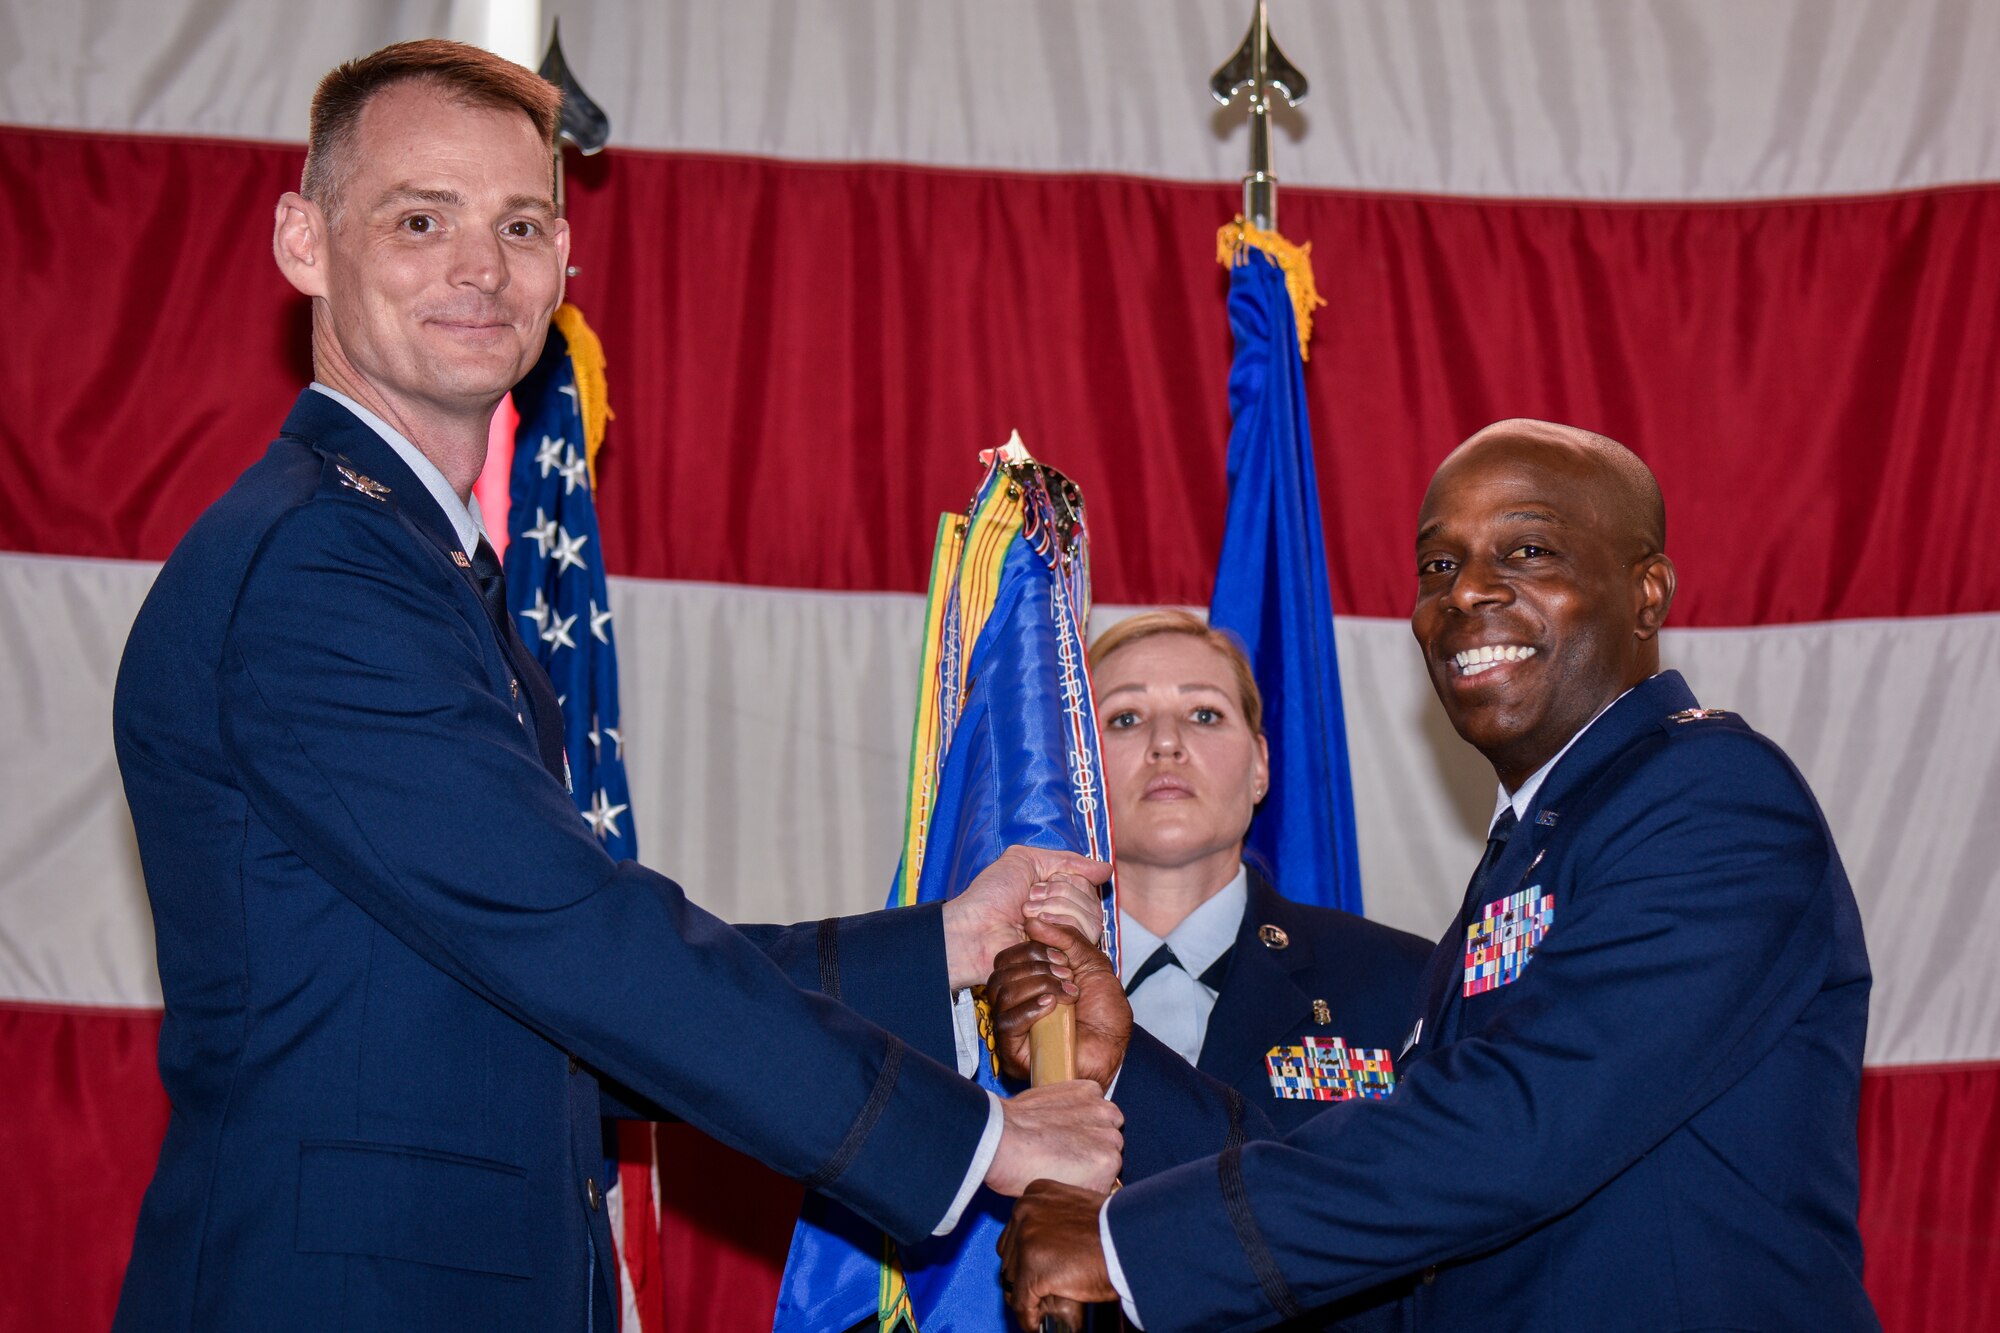 U.S. Air Force Col. Gregory Coleman (right), accepts the guidon and command of the 377th Medical Group from Col. David Miller, 377th Air Base Wing commander, in a change of command ceremony at Kirtland Air Force Base, N.M., June 27, 2019. As the 377th MDG commander, Coleman will continue where his predecessor left off and lead his Airmen in advancing the human weapons system, promoting optimal health and provide trusted care to Team Kirtland. (U.S. Air Force photo by Airman 1st Class Austin J. Prisbrey)